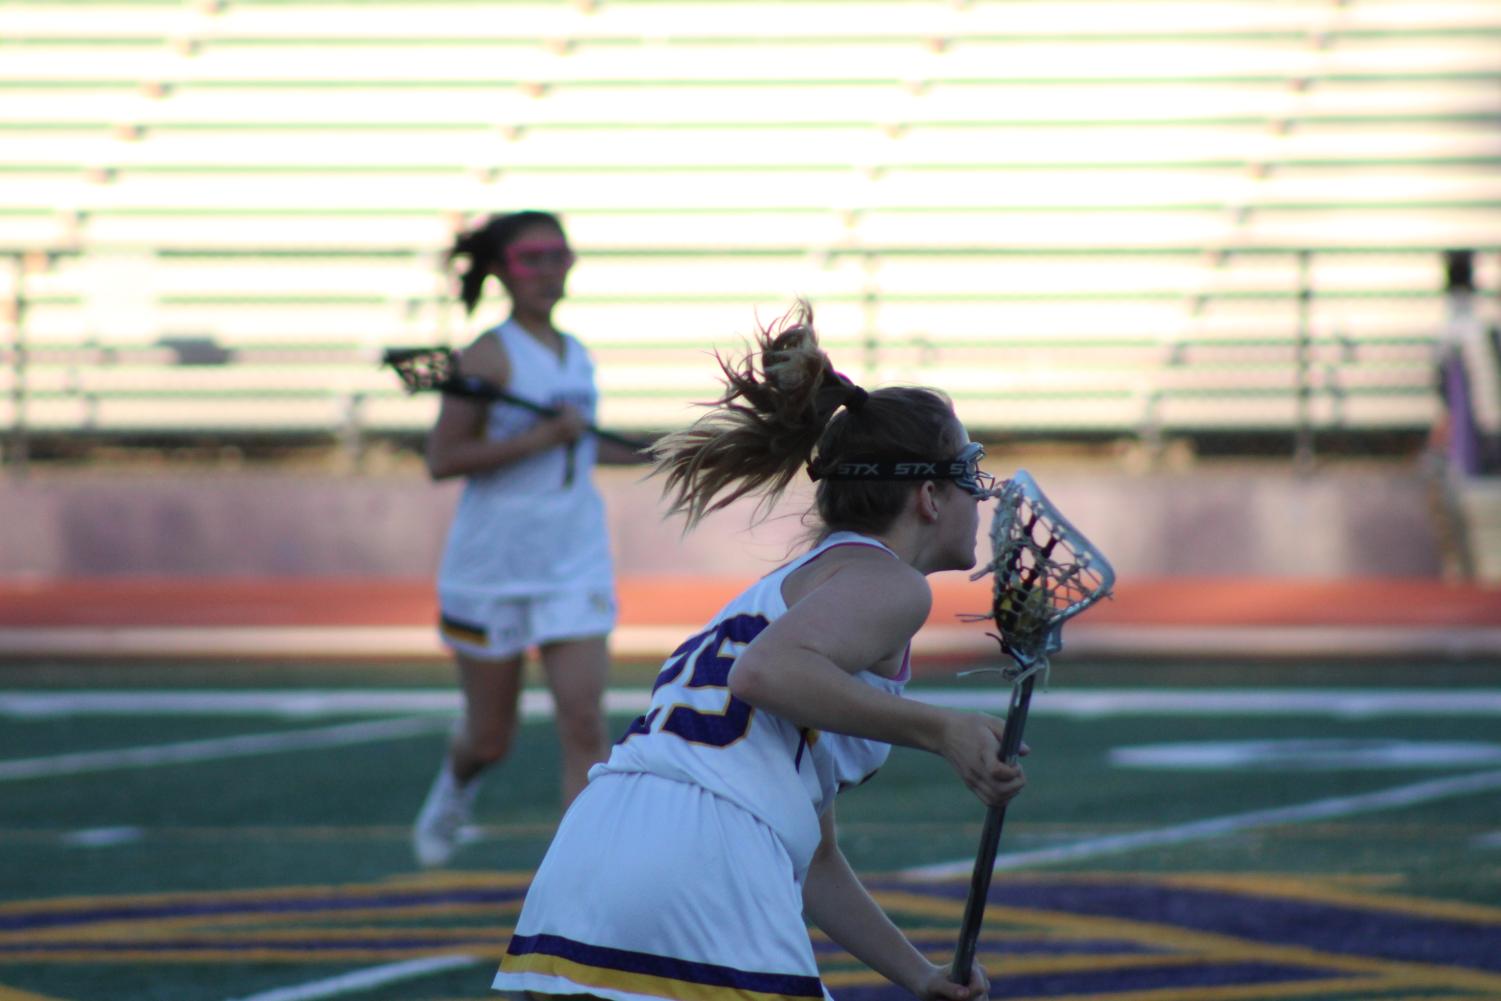 Girls+lacrosse+ends+game+with+a+win+against+Piedmont